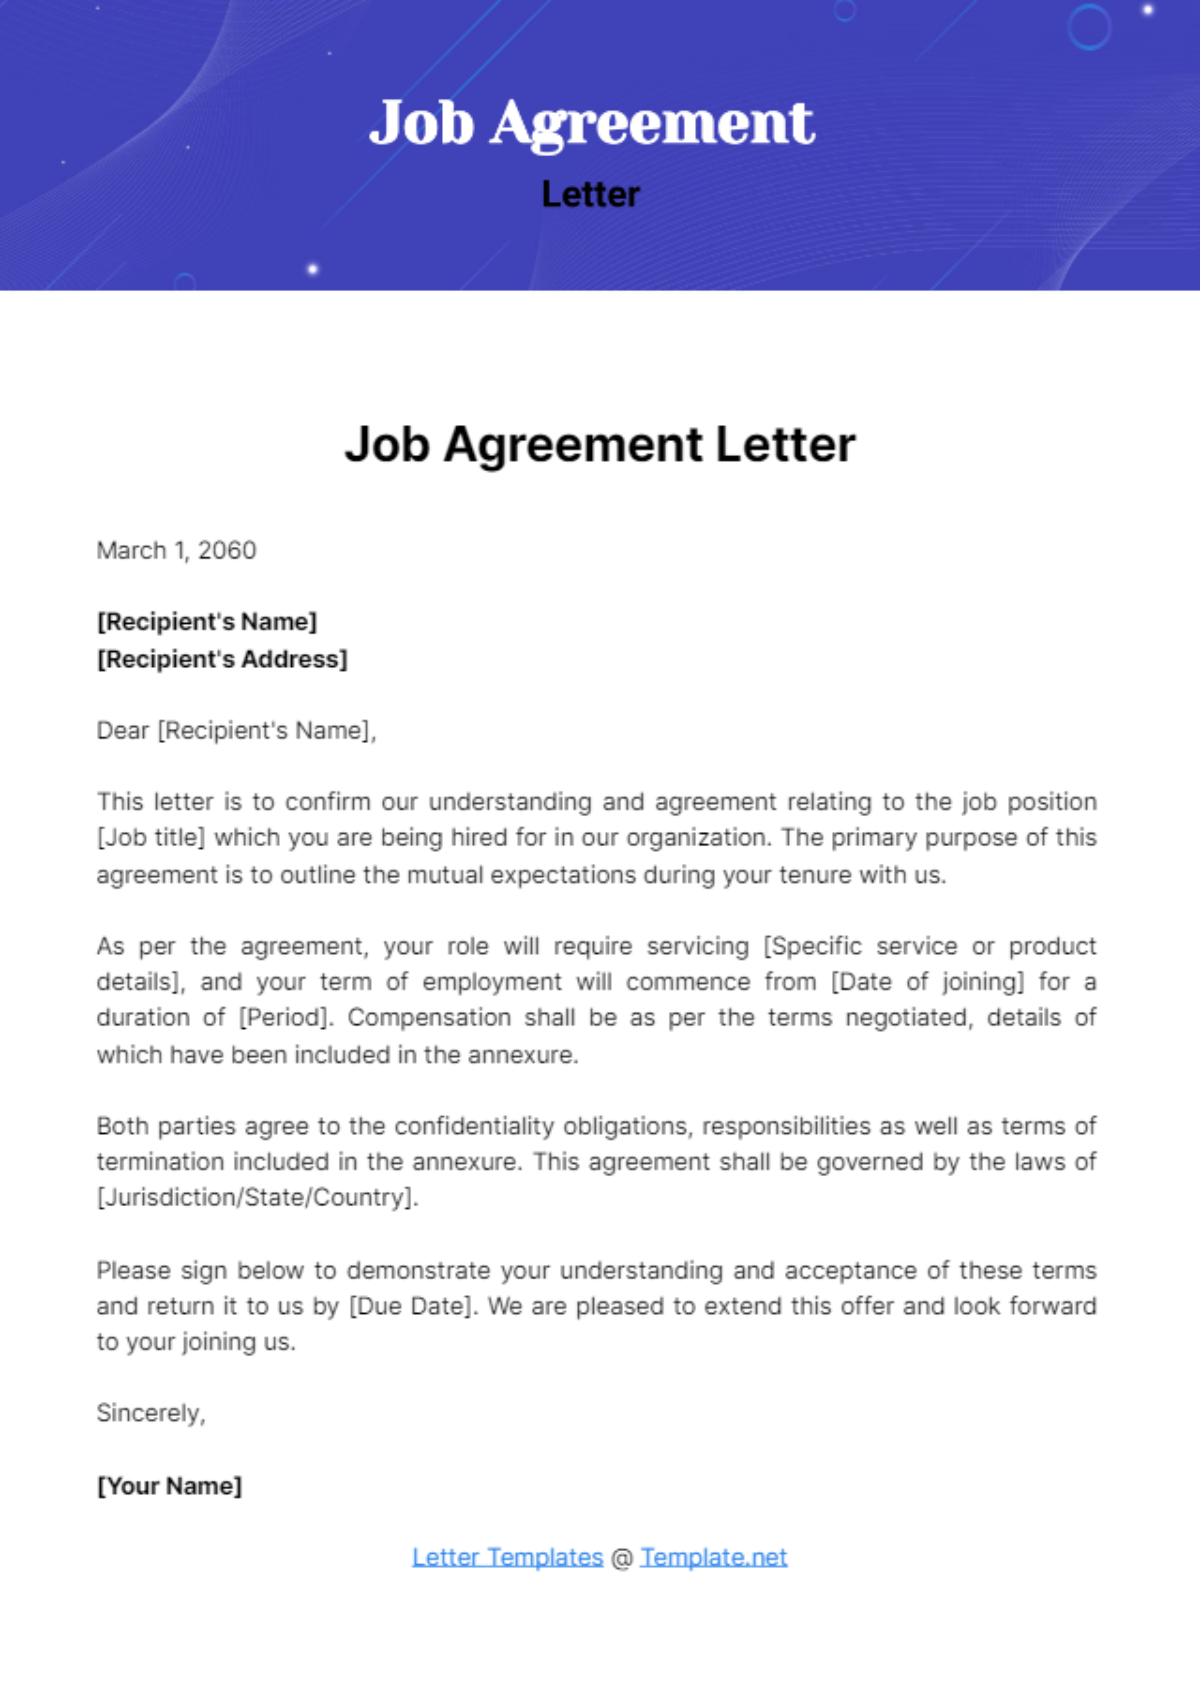 Free Job Agreement Letter Template